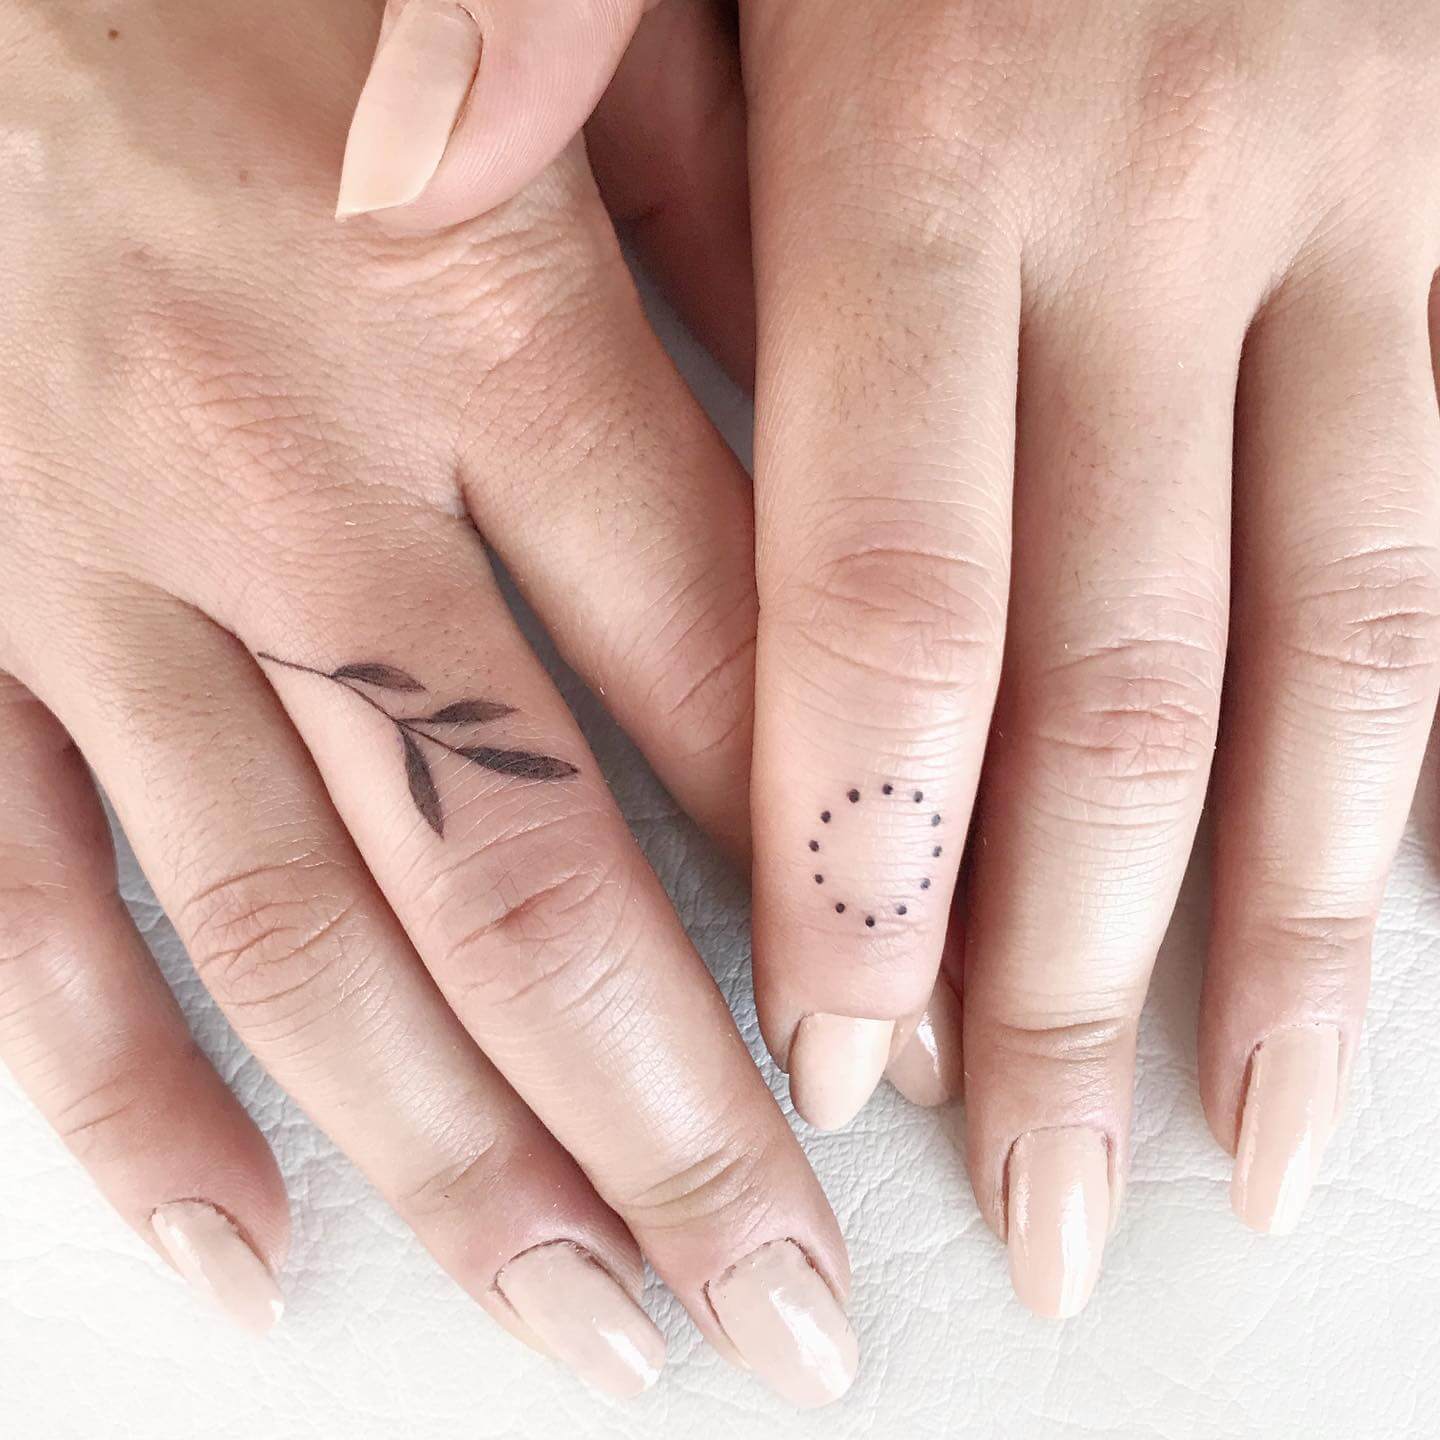 40 Tiny Finger Tattoos That Define Perfection - TattooBlend